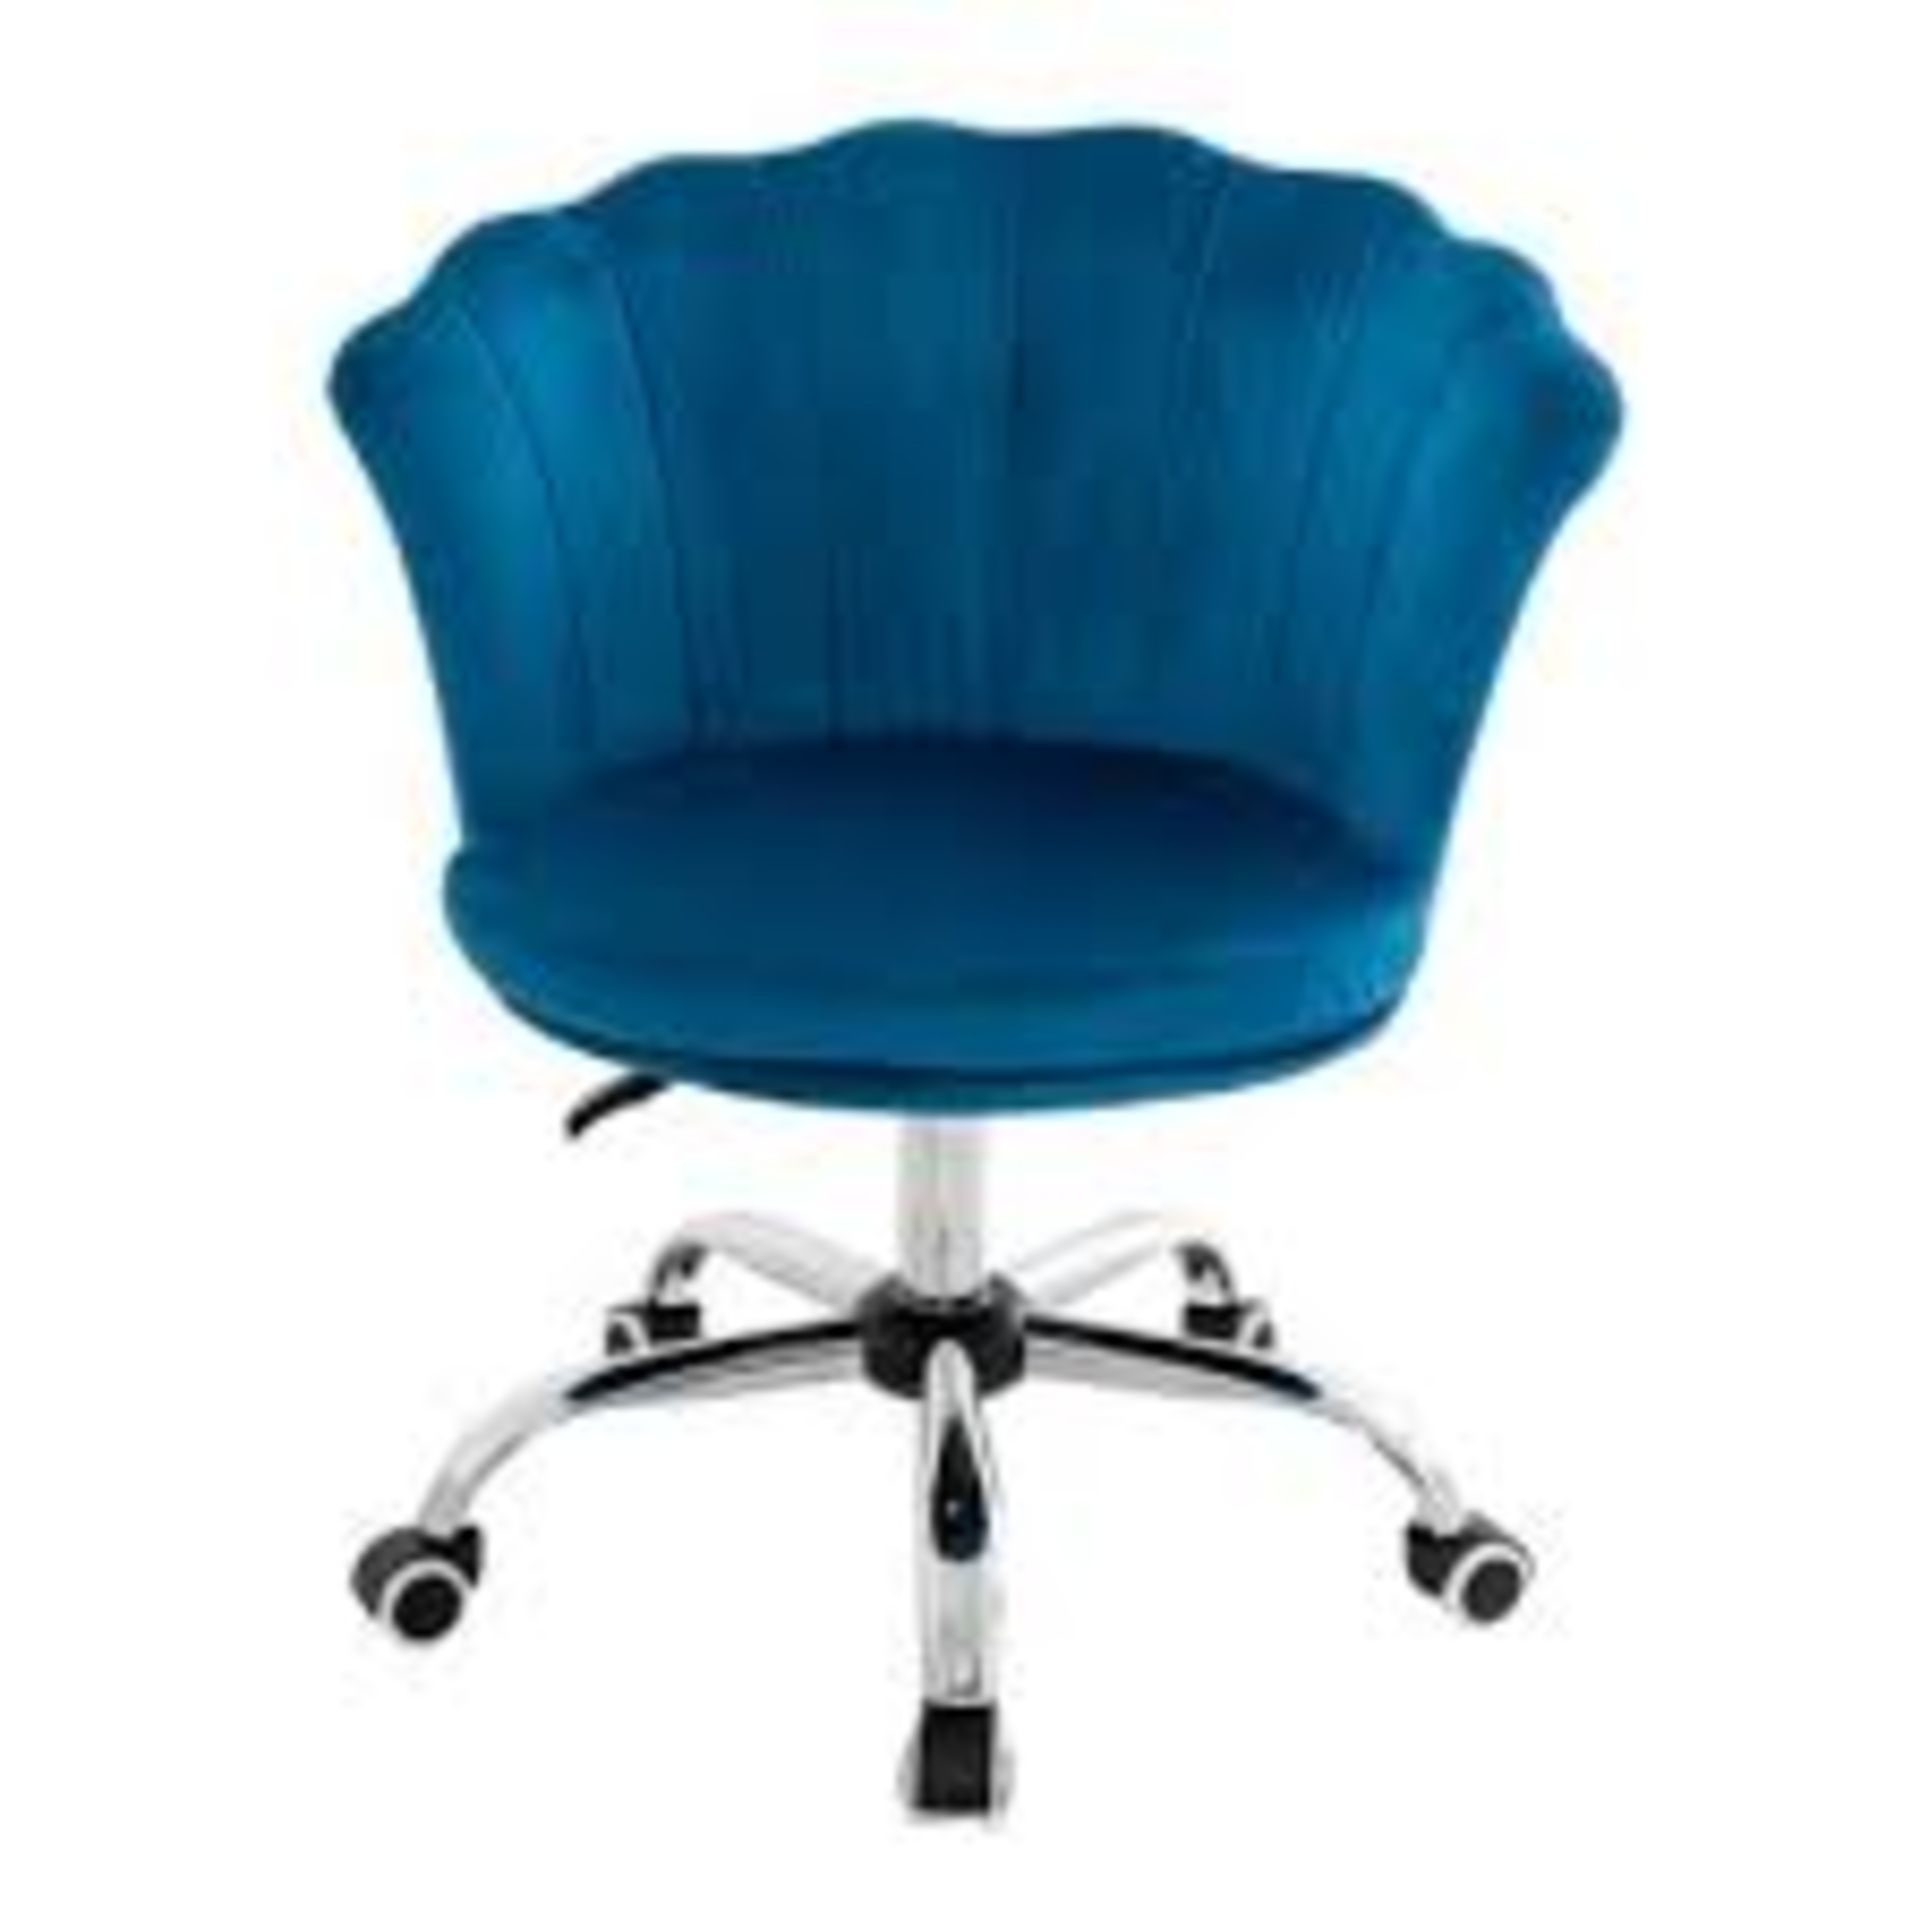 Adjustable Velvet Office Chair with Handle and Universal Wheels. - R14.9. The delicate shell petal